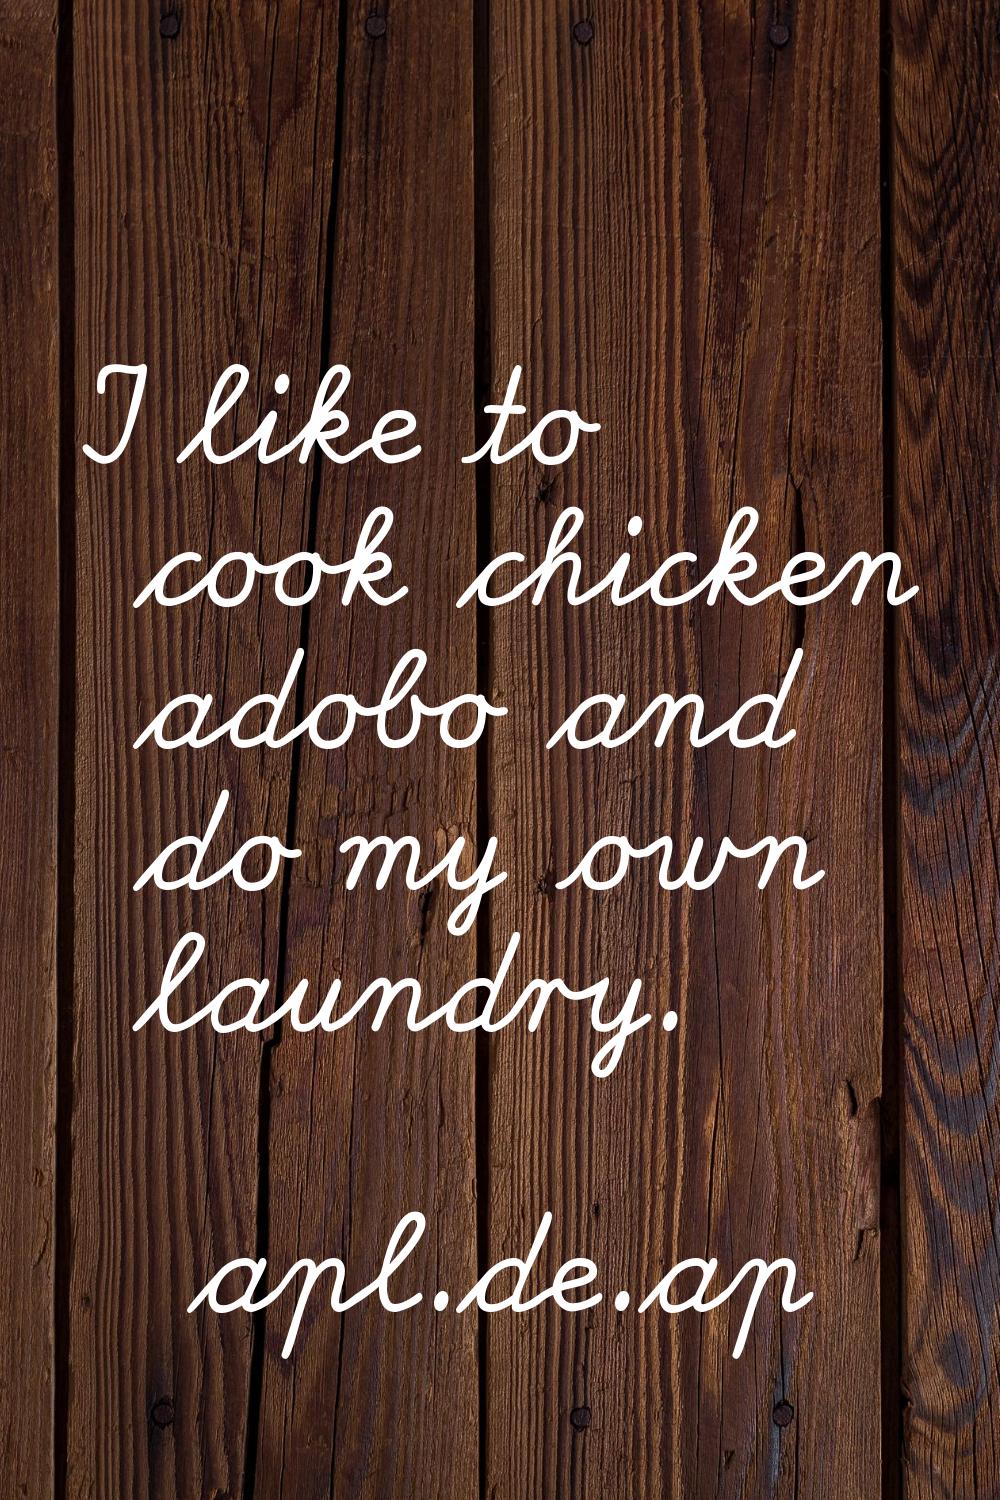 I like to cook chicken adobo and do my own laundry.